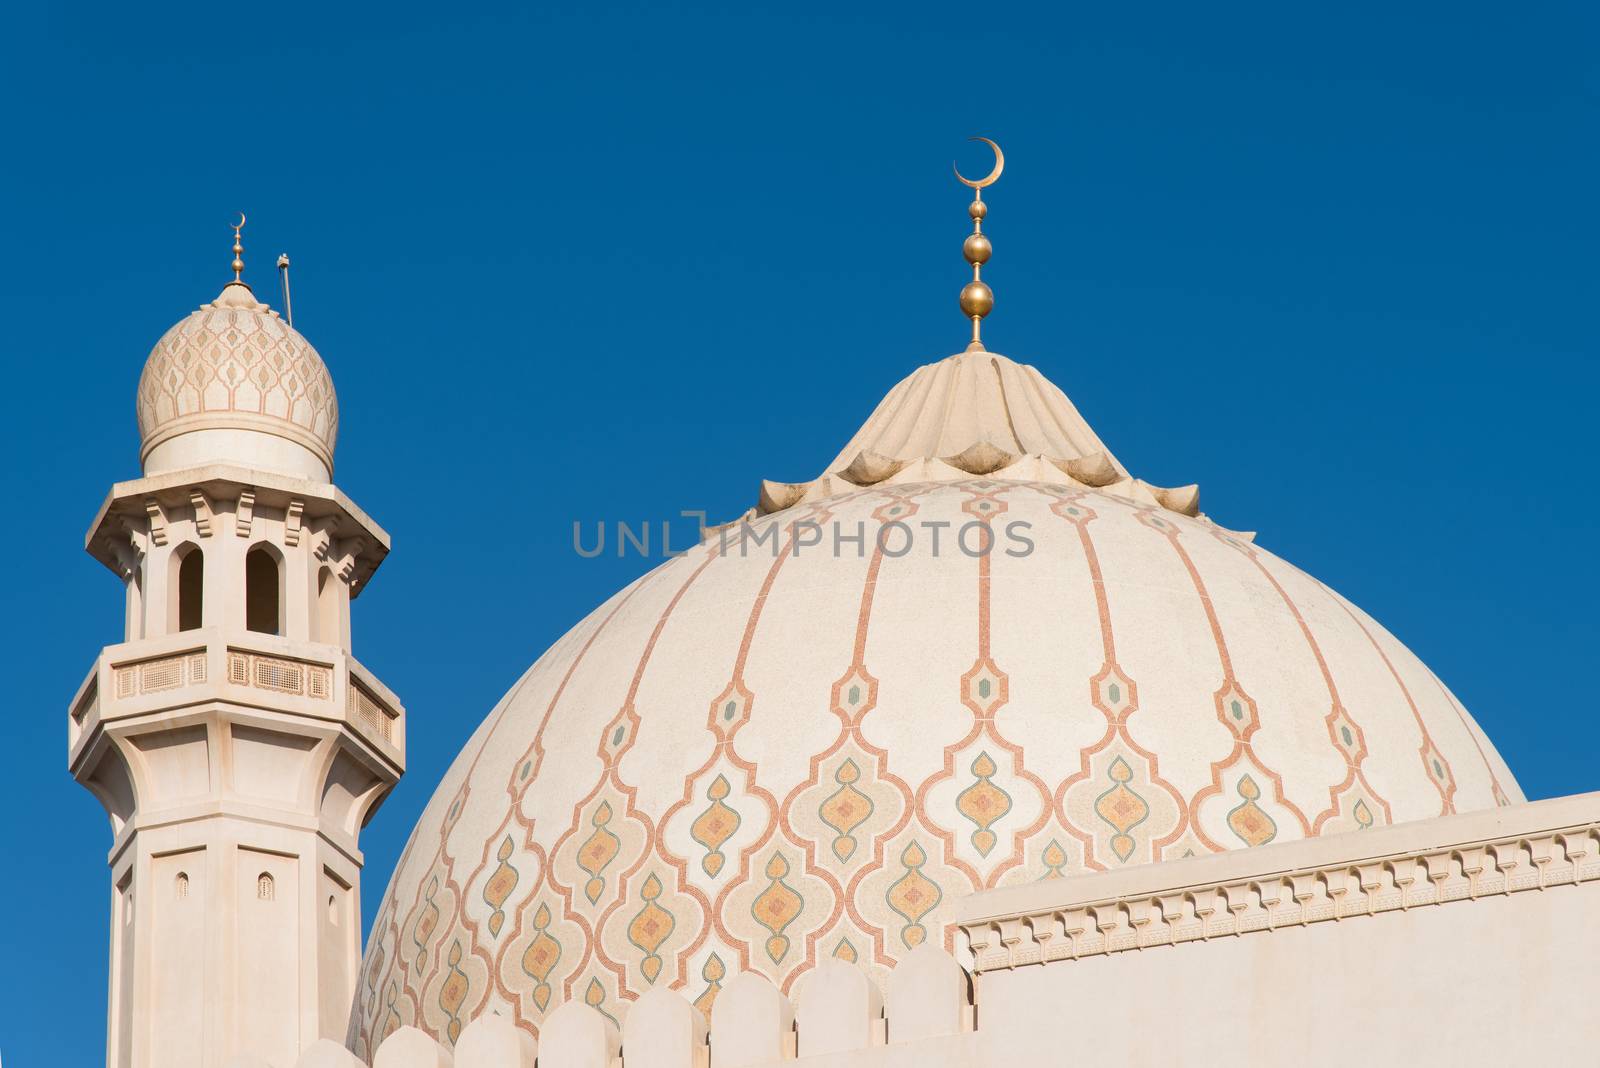 The dome and one of the minarets of the Sultan Qaboos Grand Mosque in Salalah, Dhofar Region of Oman.